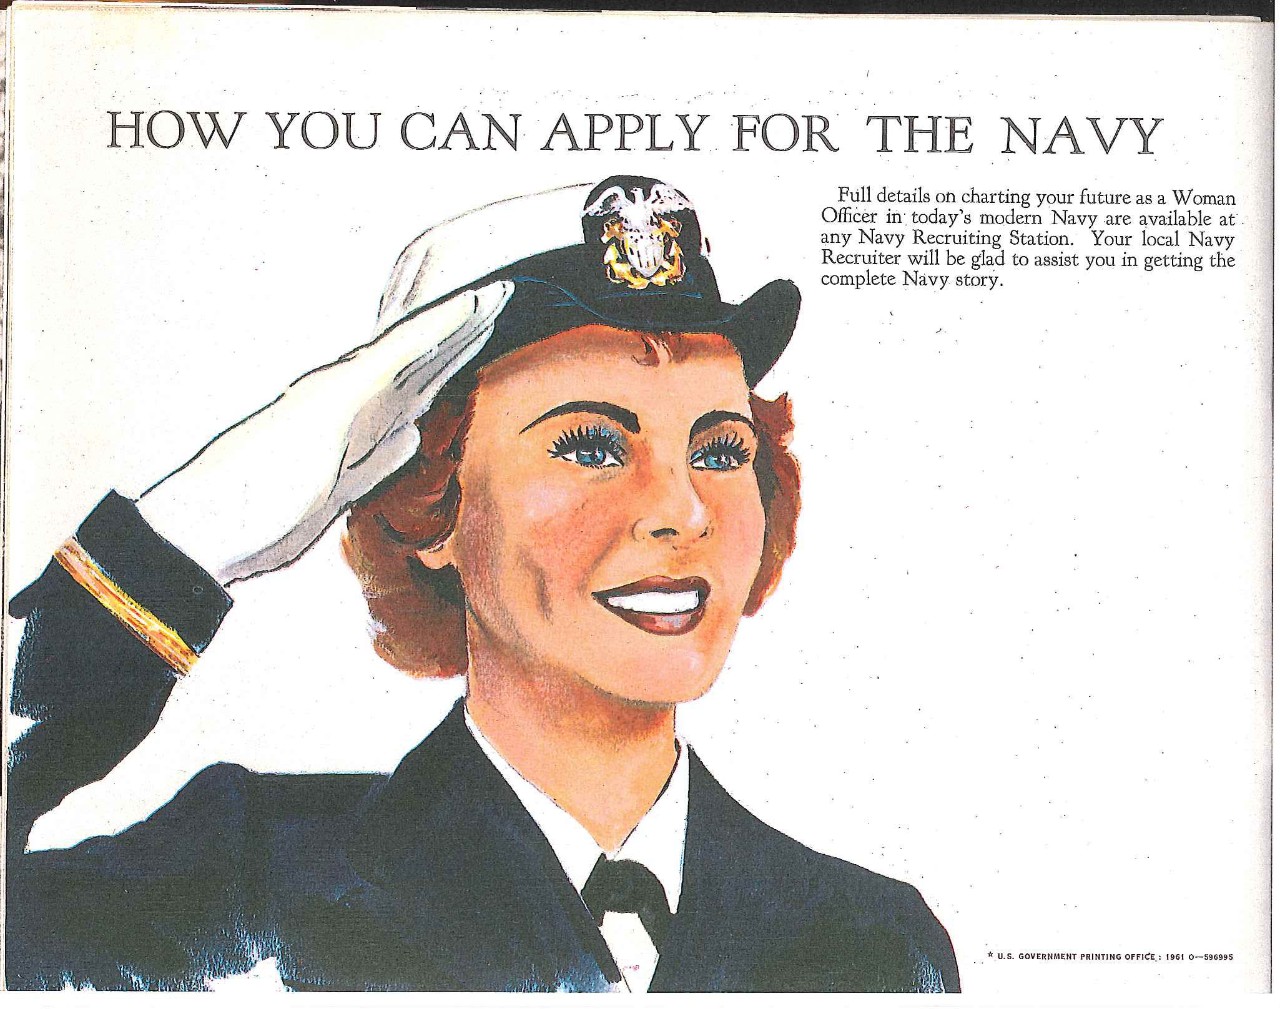 Apply for the Navy